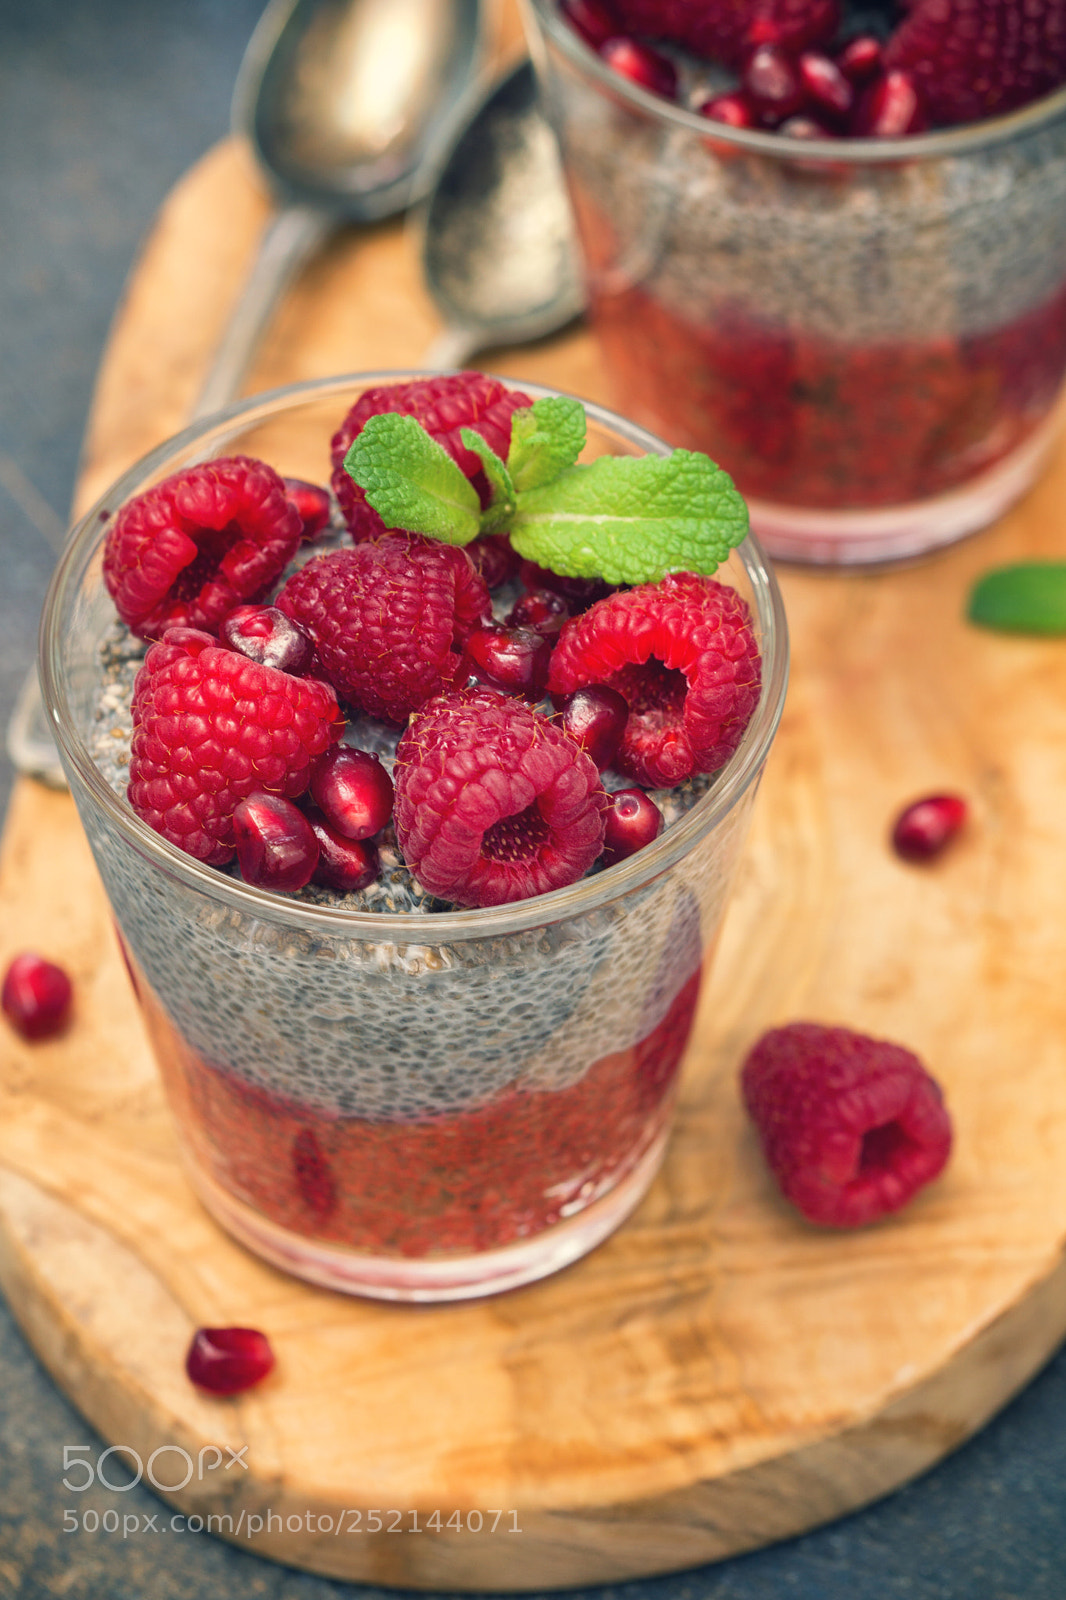 Sony a6300 sample photo. Chia seed pudding photography